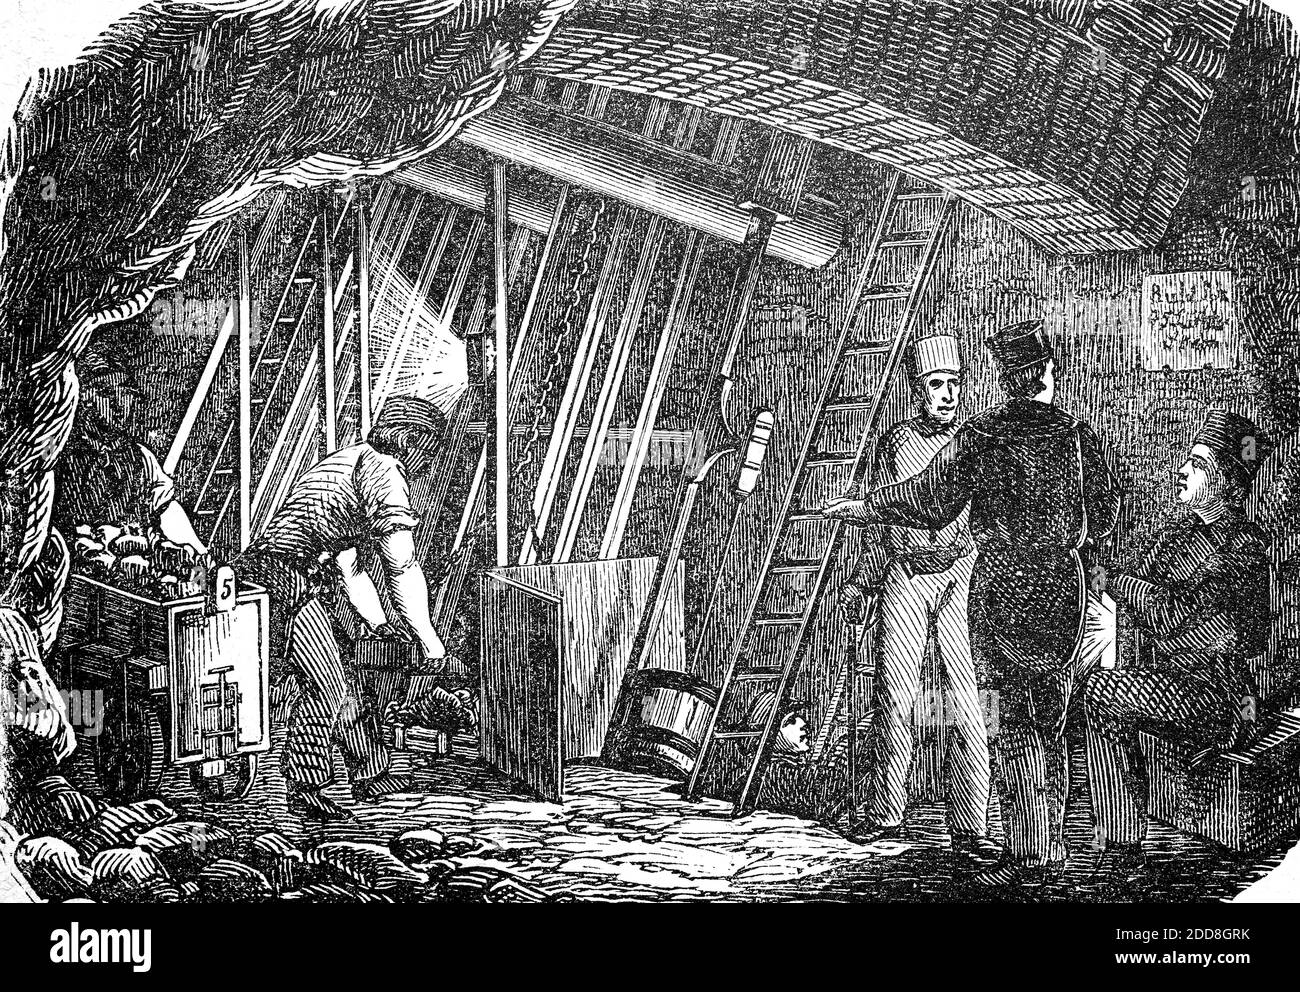 Mining, Mine, Filling the ore into a lorry, England, 1880  /  Bergbau, Mine, Einfüllen des Erz in eine Lore, England, 1880, Historisch, historical, digital improved reproduction of an original from the 19th century / digitale Reproduktion einer Originalvorlage aus dem 19. Jahrhundert, Stock Photo